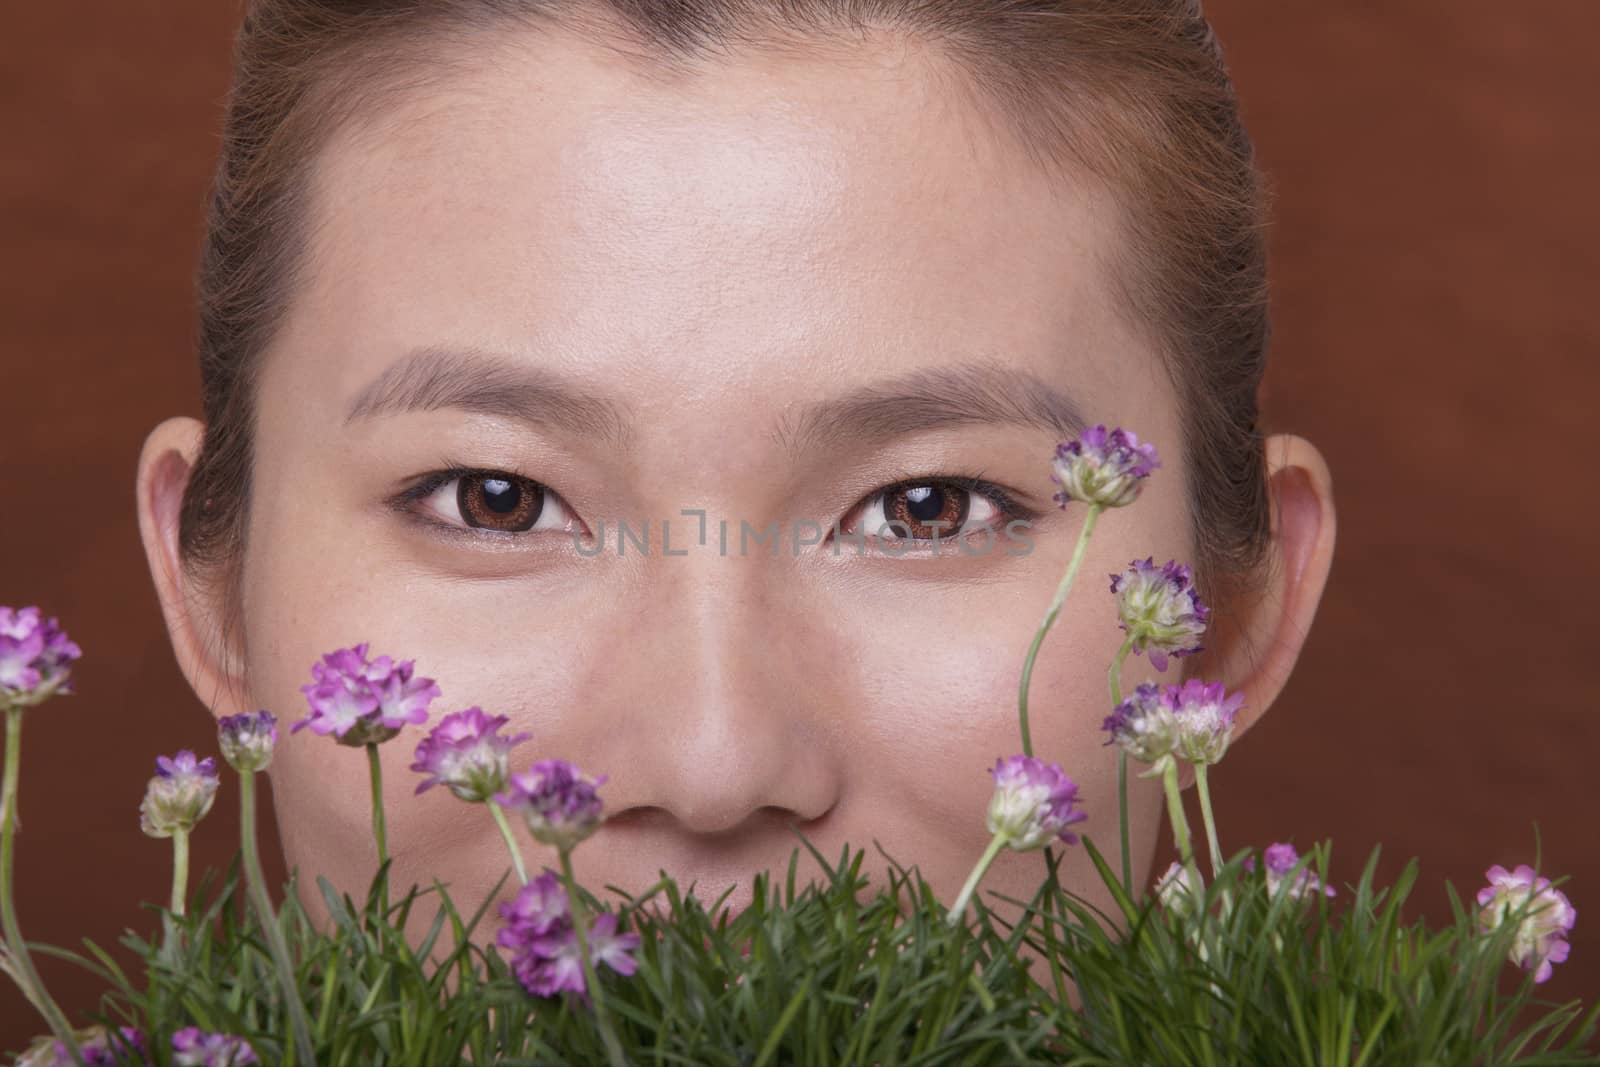 Close- up portrait of young woman with her face behind some flowers and grass, studio shot